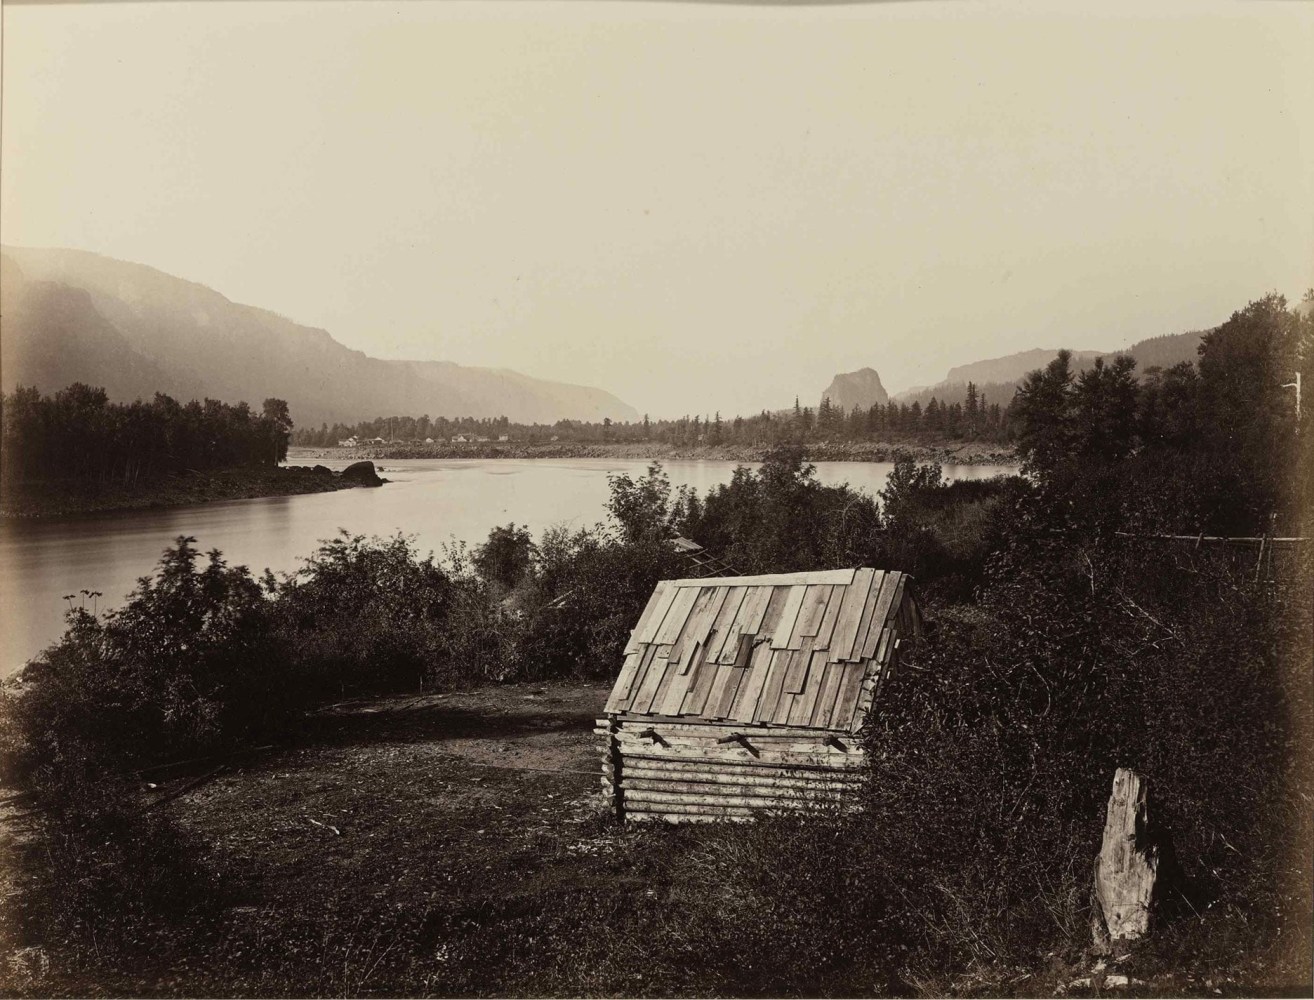 Carleton E. WATKINS (American, 1829-1916) The Garrison, Columbia River, Oregon, circa 1867 Mammoth plate albumen print 40.3 x 52.7 cm mounted on 53.0 x 67.0 cm board Titled in an unidentified contemporary calligraphic hand in ink and numbered &quot;23&quot; in an unidentified modern hand in pencil on mount. Two San Francisco Museum of Modern Art exhibition labels on verso.